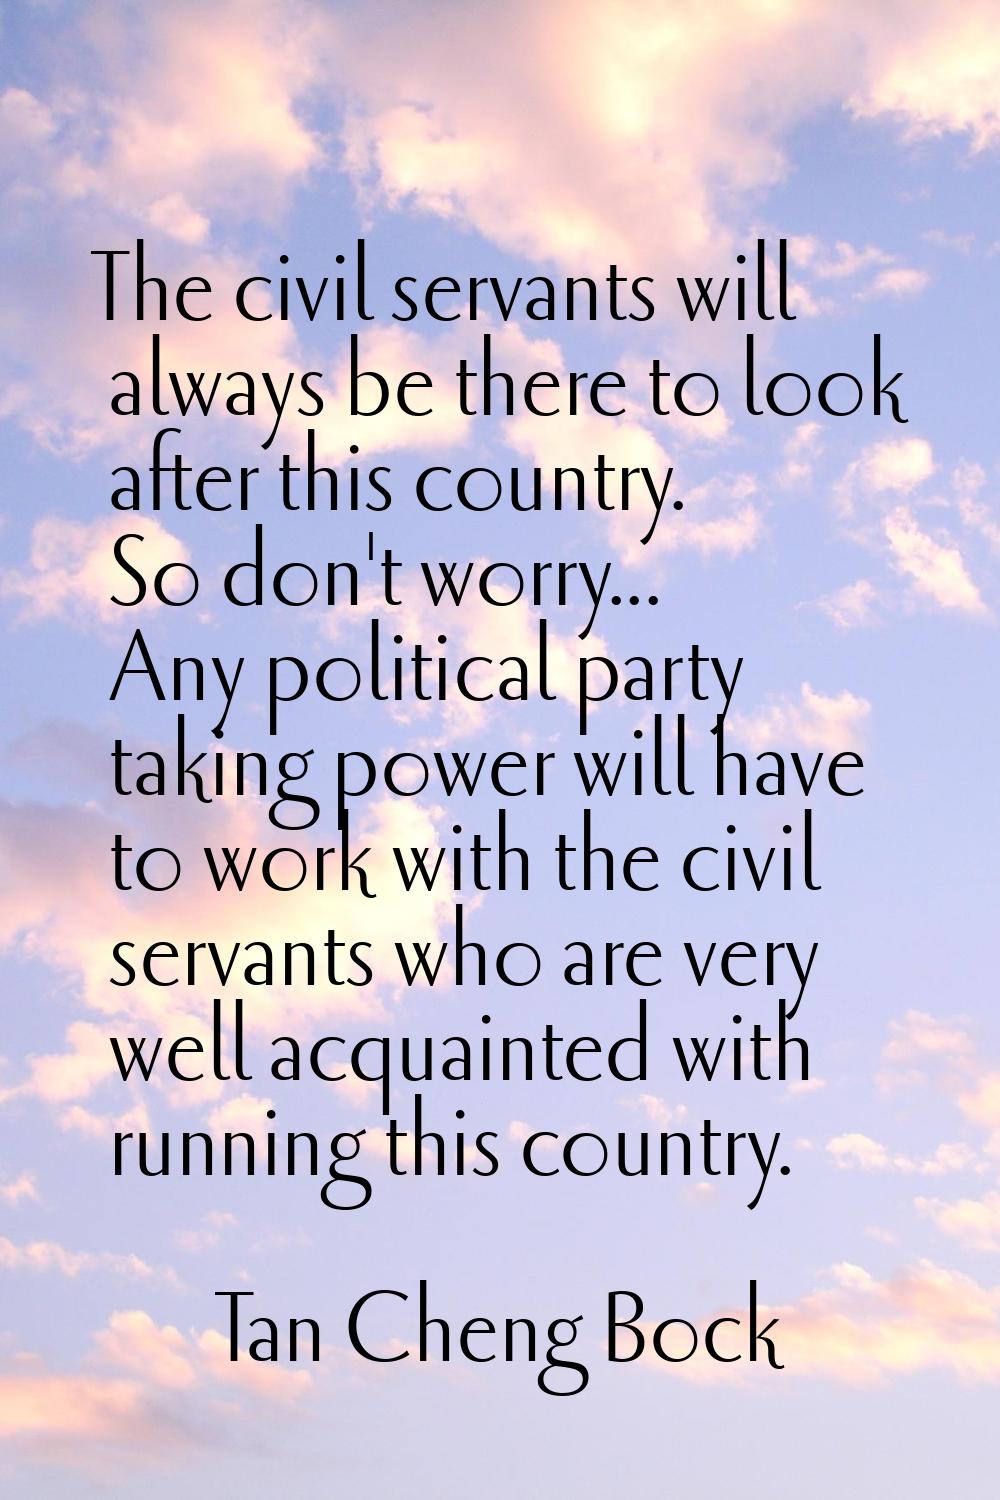 The civil servants will always be there to look after this country. So don't worry... Any political